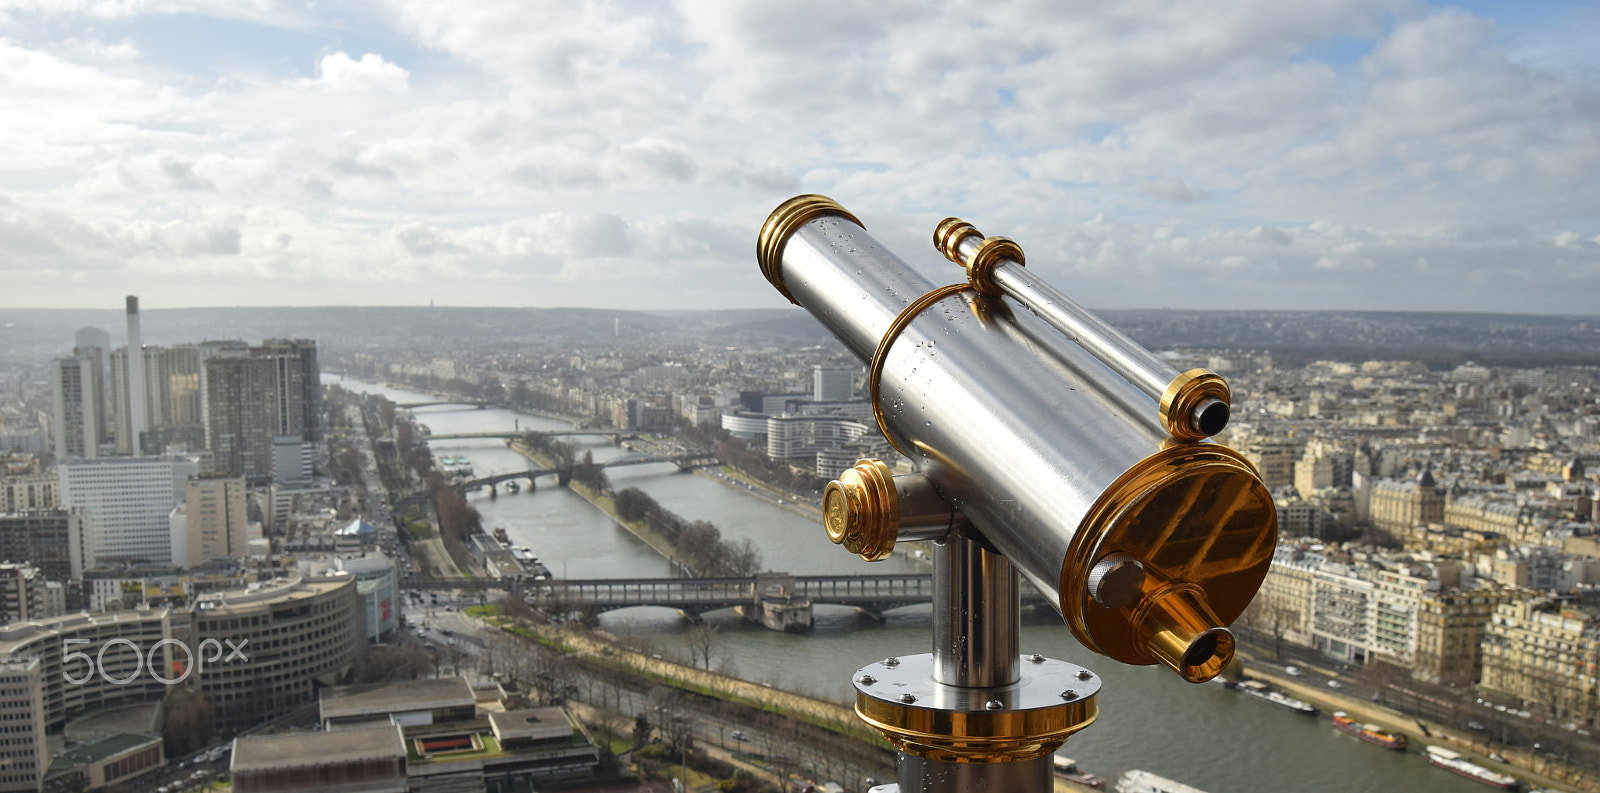 Nikon D5300 sample photo. Watching paris from eiffel tower photography